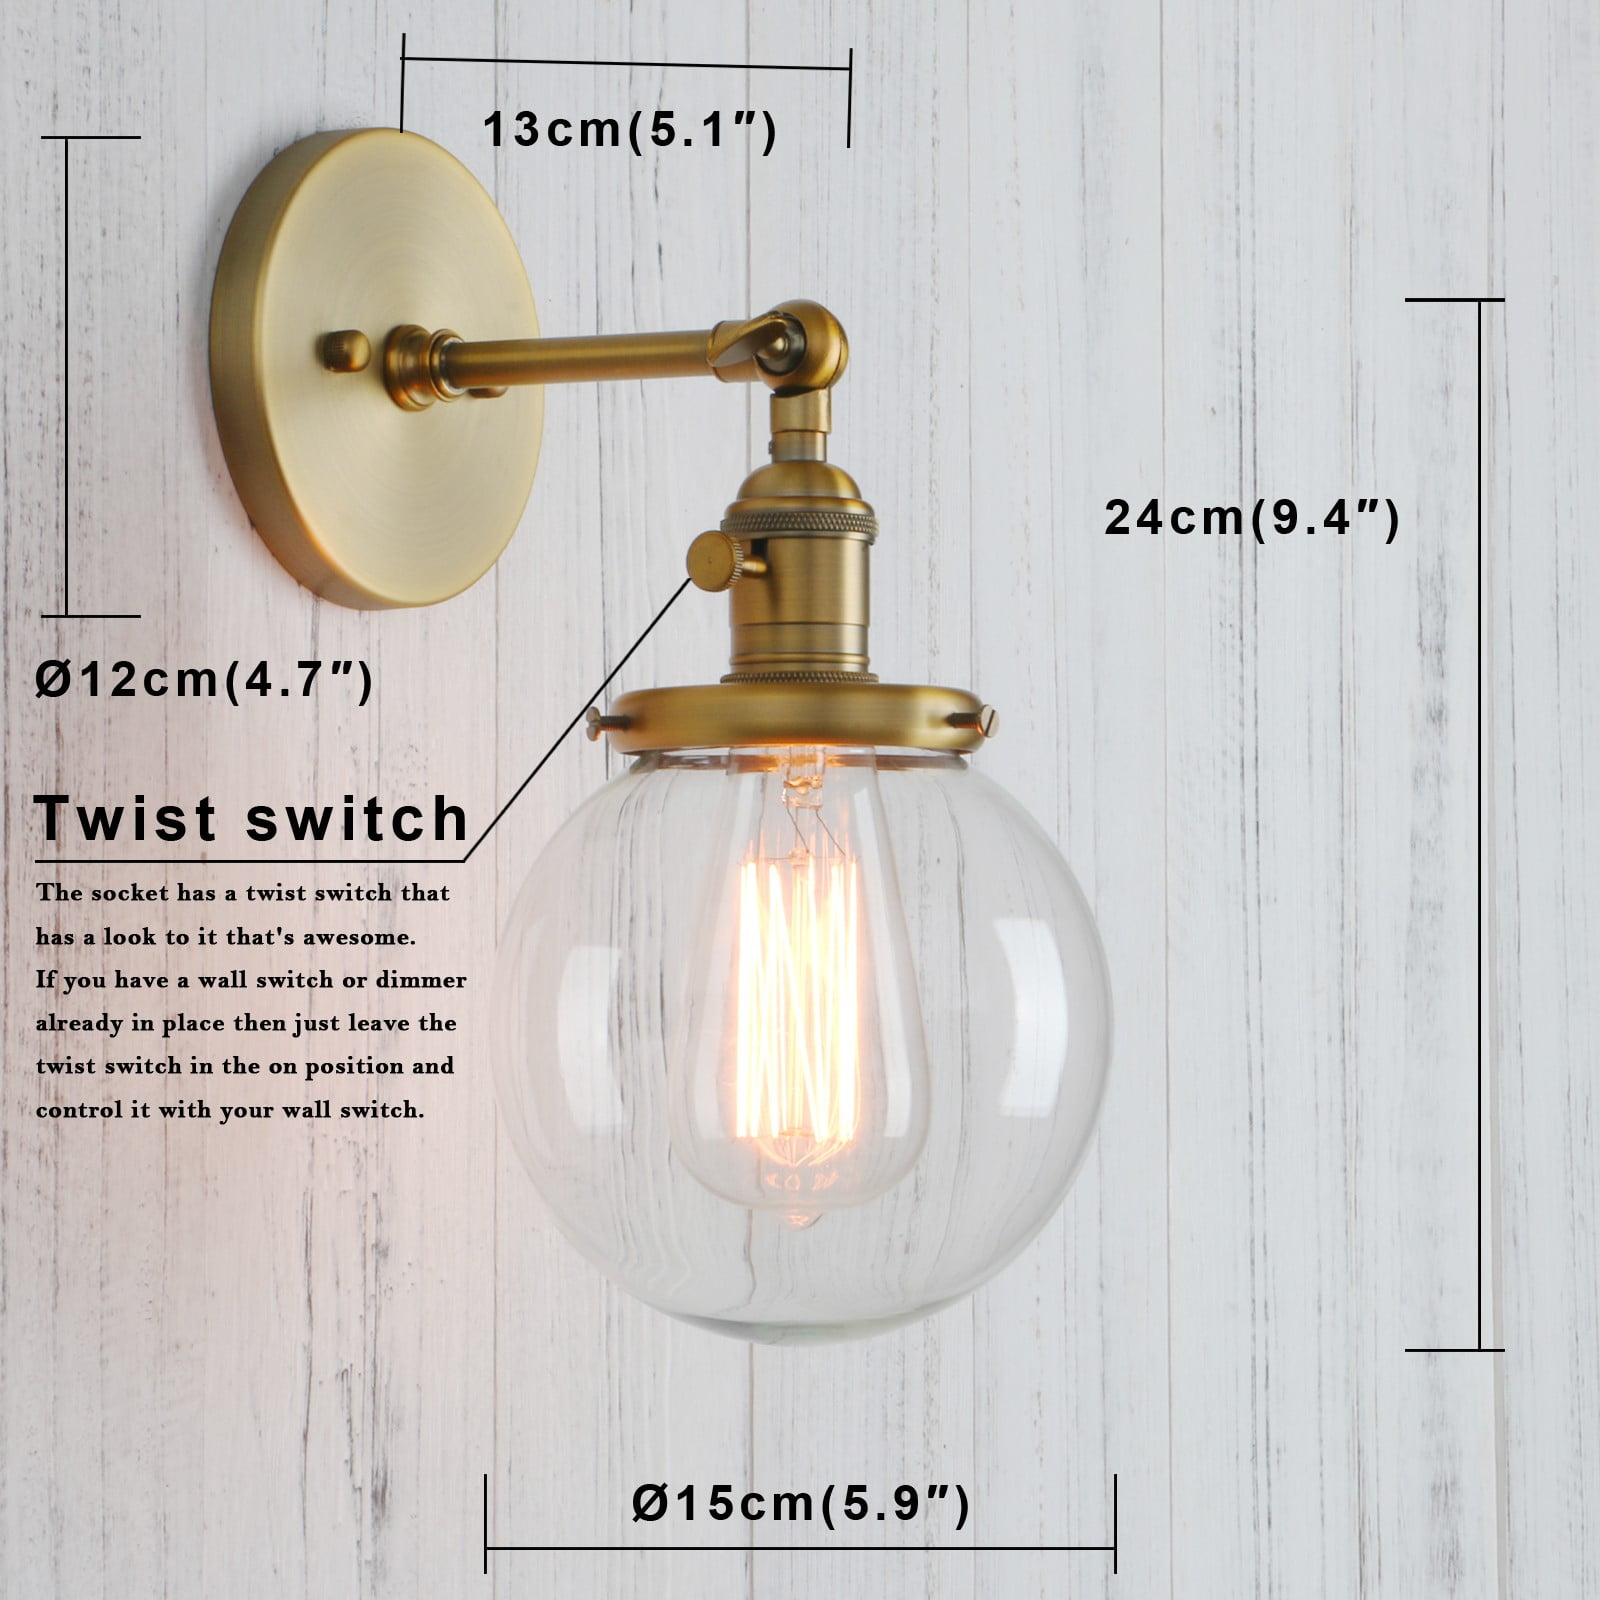 5.9" GLOBE CLEAR GLASS VINTAGE INDUSTRIAL WALL LAMP SCONCE PLUG IN DECOR LIGHT 